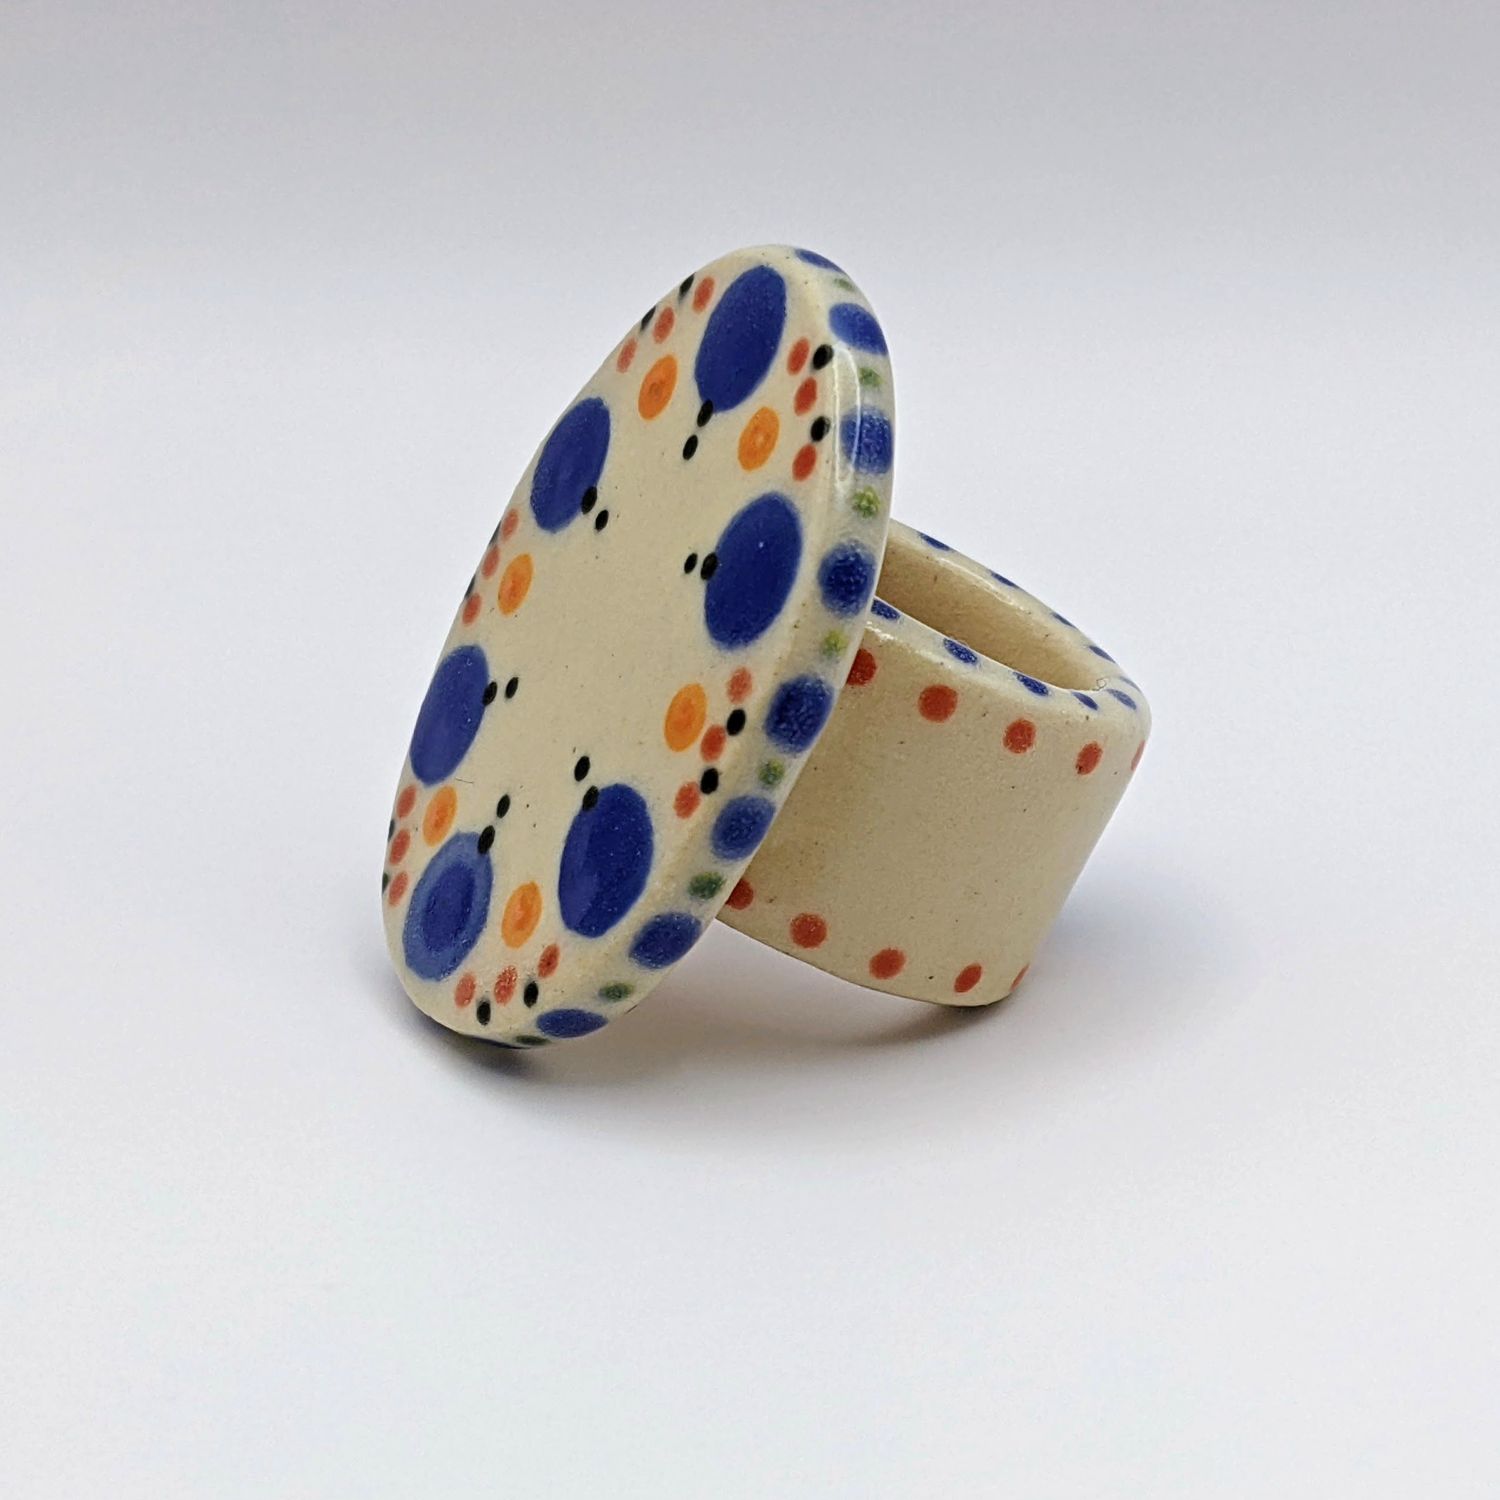 Here and Here: Blue Dot Ceramic Ring – Medium Product Image 1 of 2